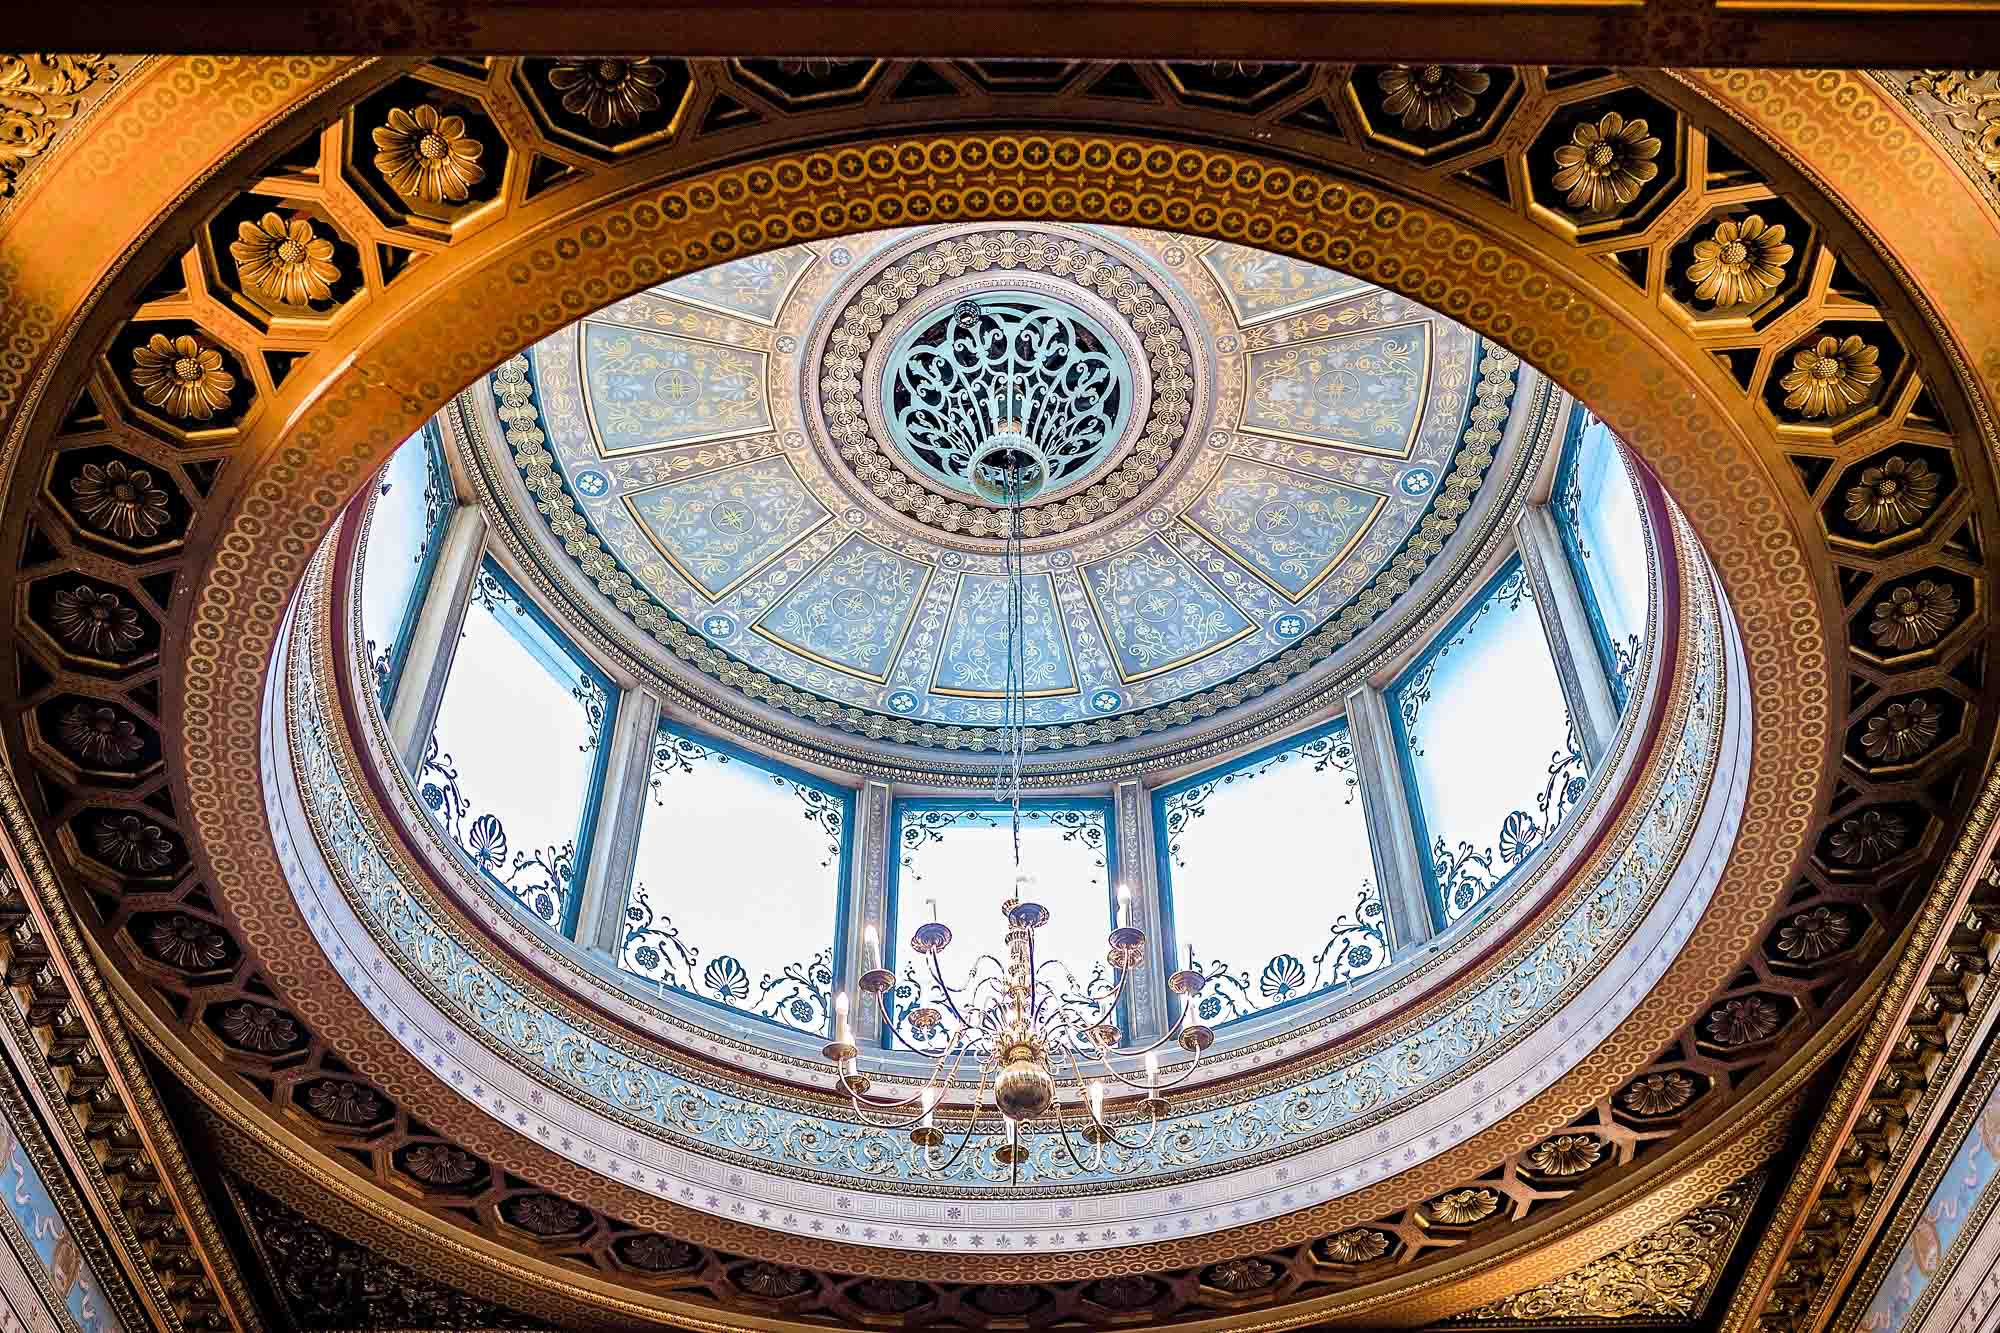 The grand dome in the ceiling of the Lantern Room in Bristol Register Office